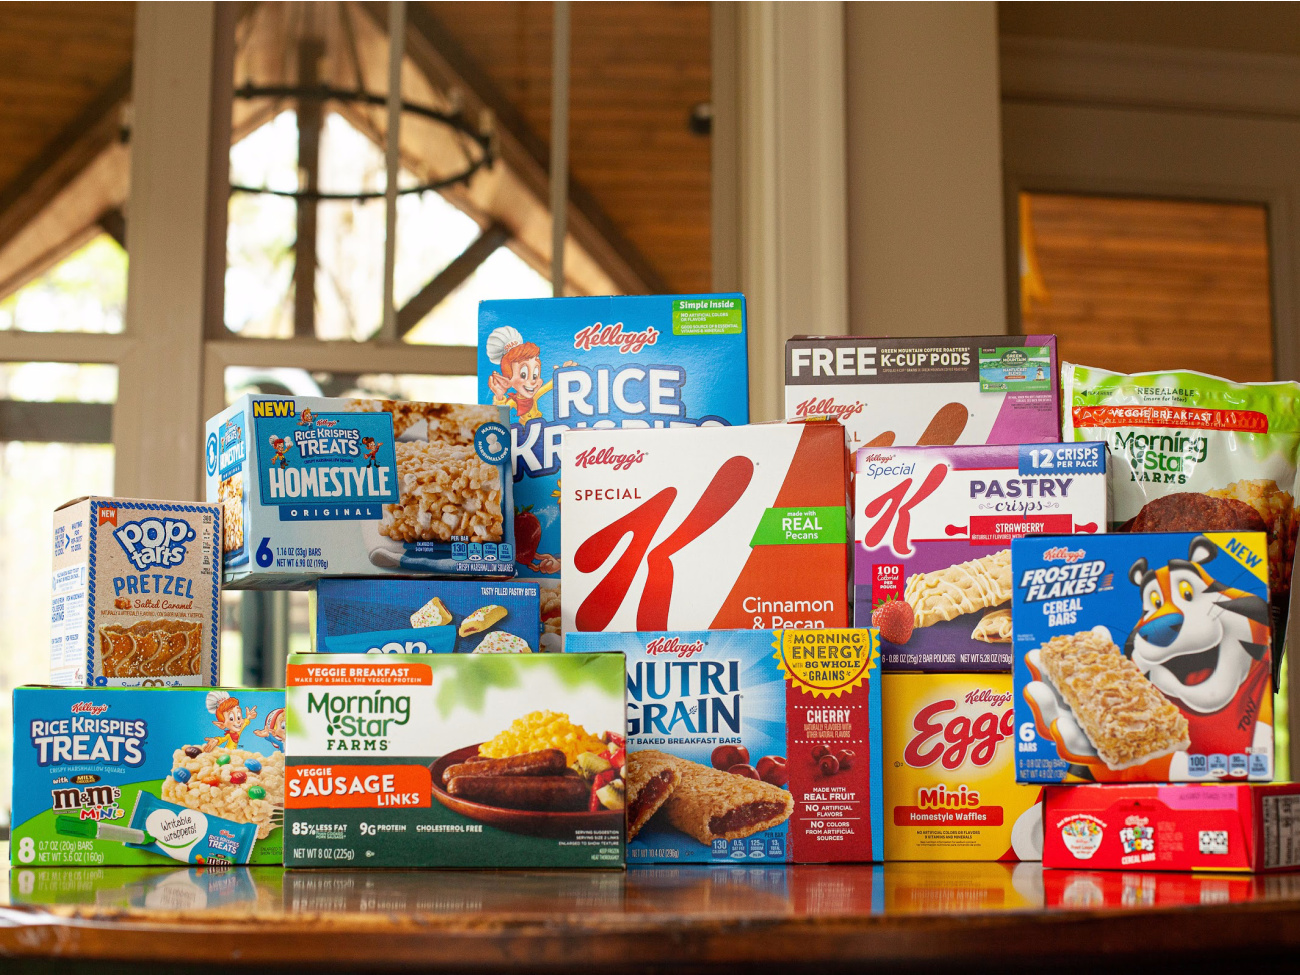 Let’s Breakfast Together With Kellogg’s® And Earn A $10 Publix Gift Card!